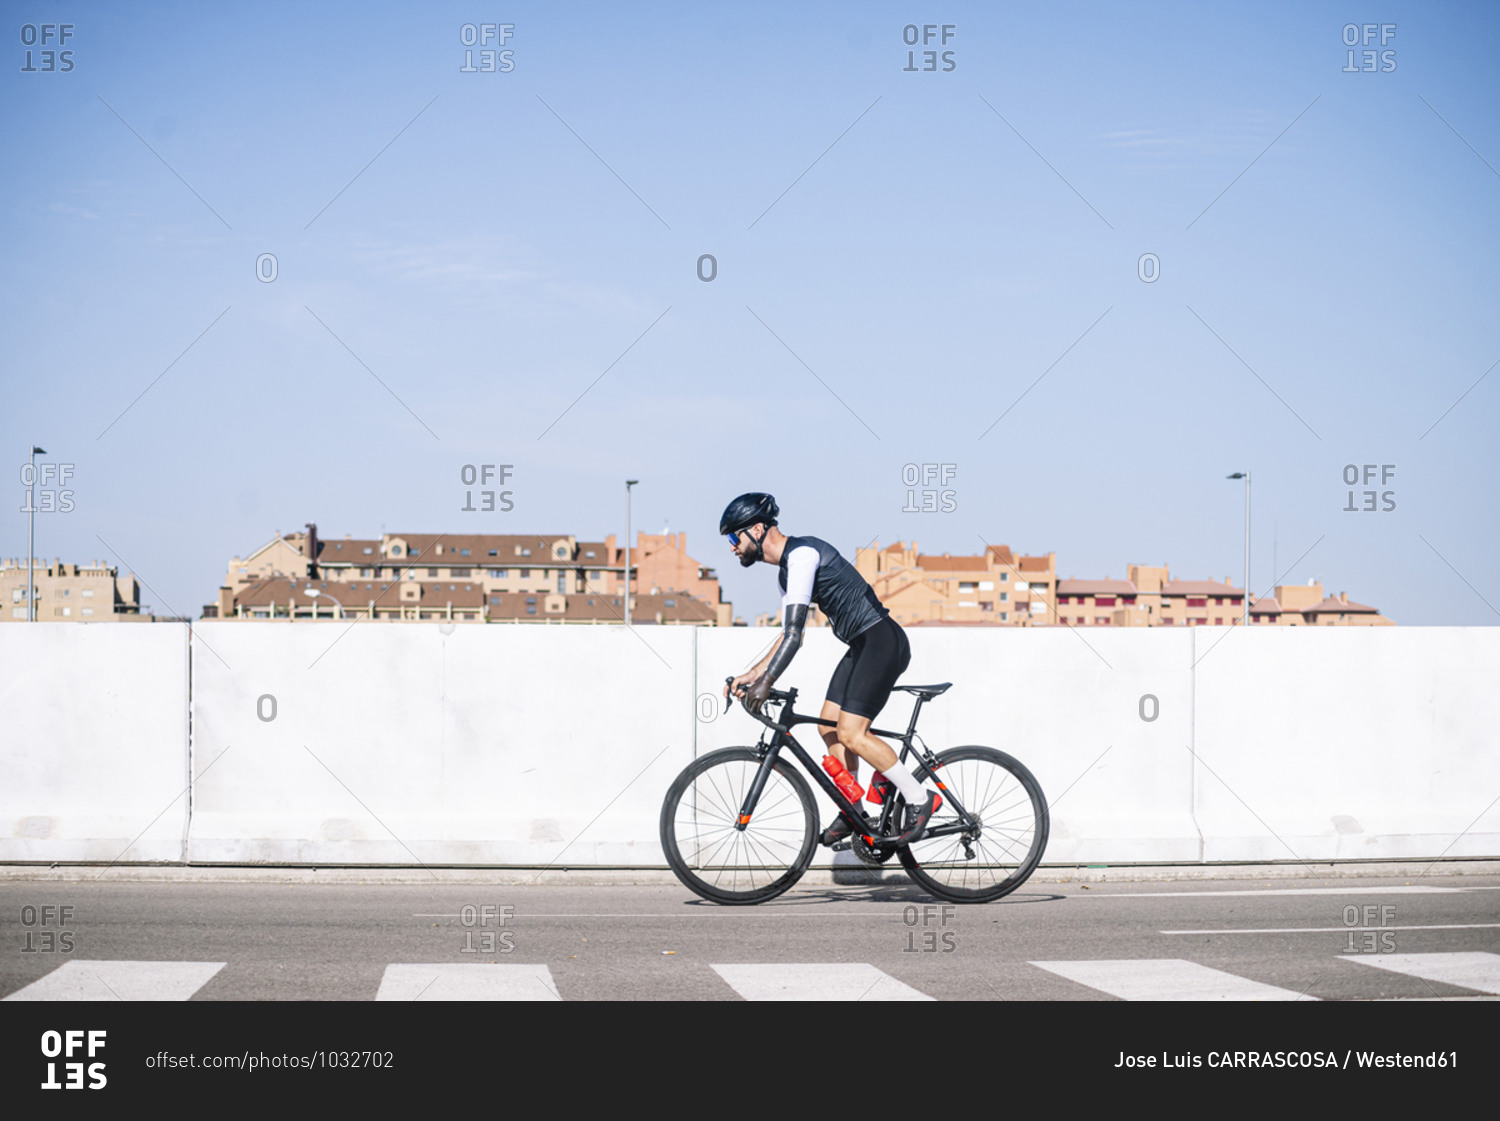 Male amputee cyclist riding bicycle on road against clear blue sky during sunny day